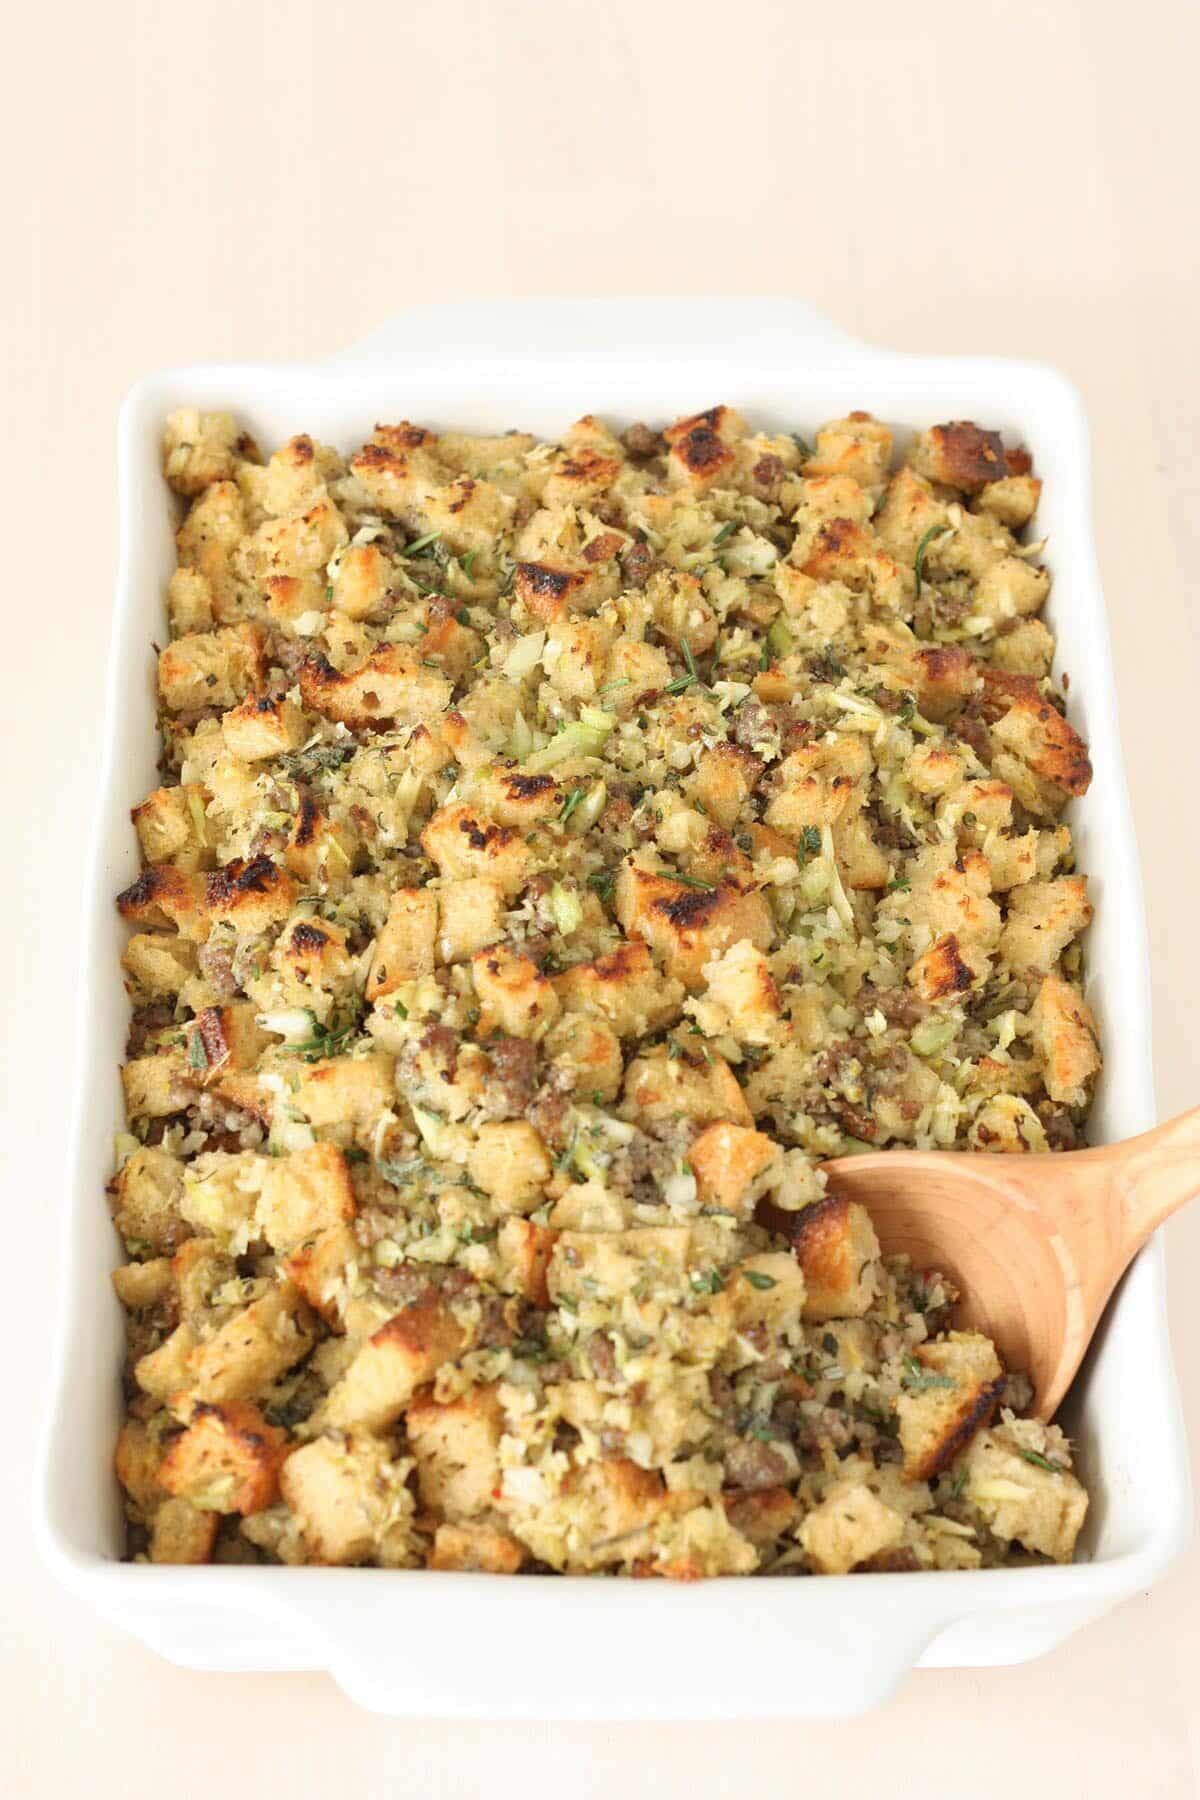 baked homemade stuffing in a white casserole dish with a wooden spoon